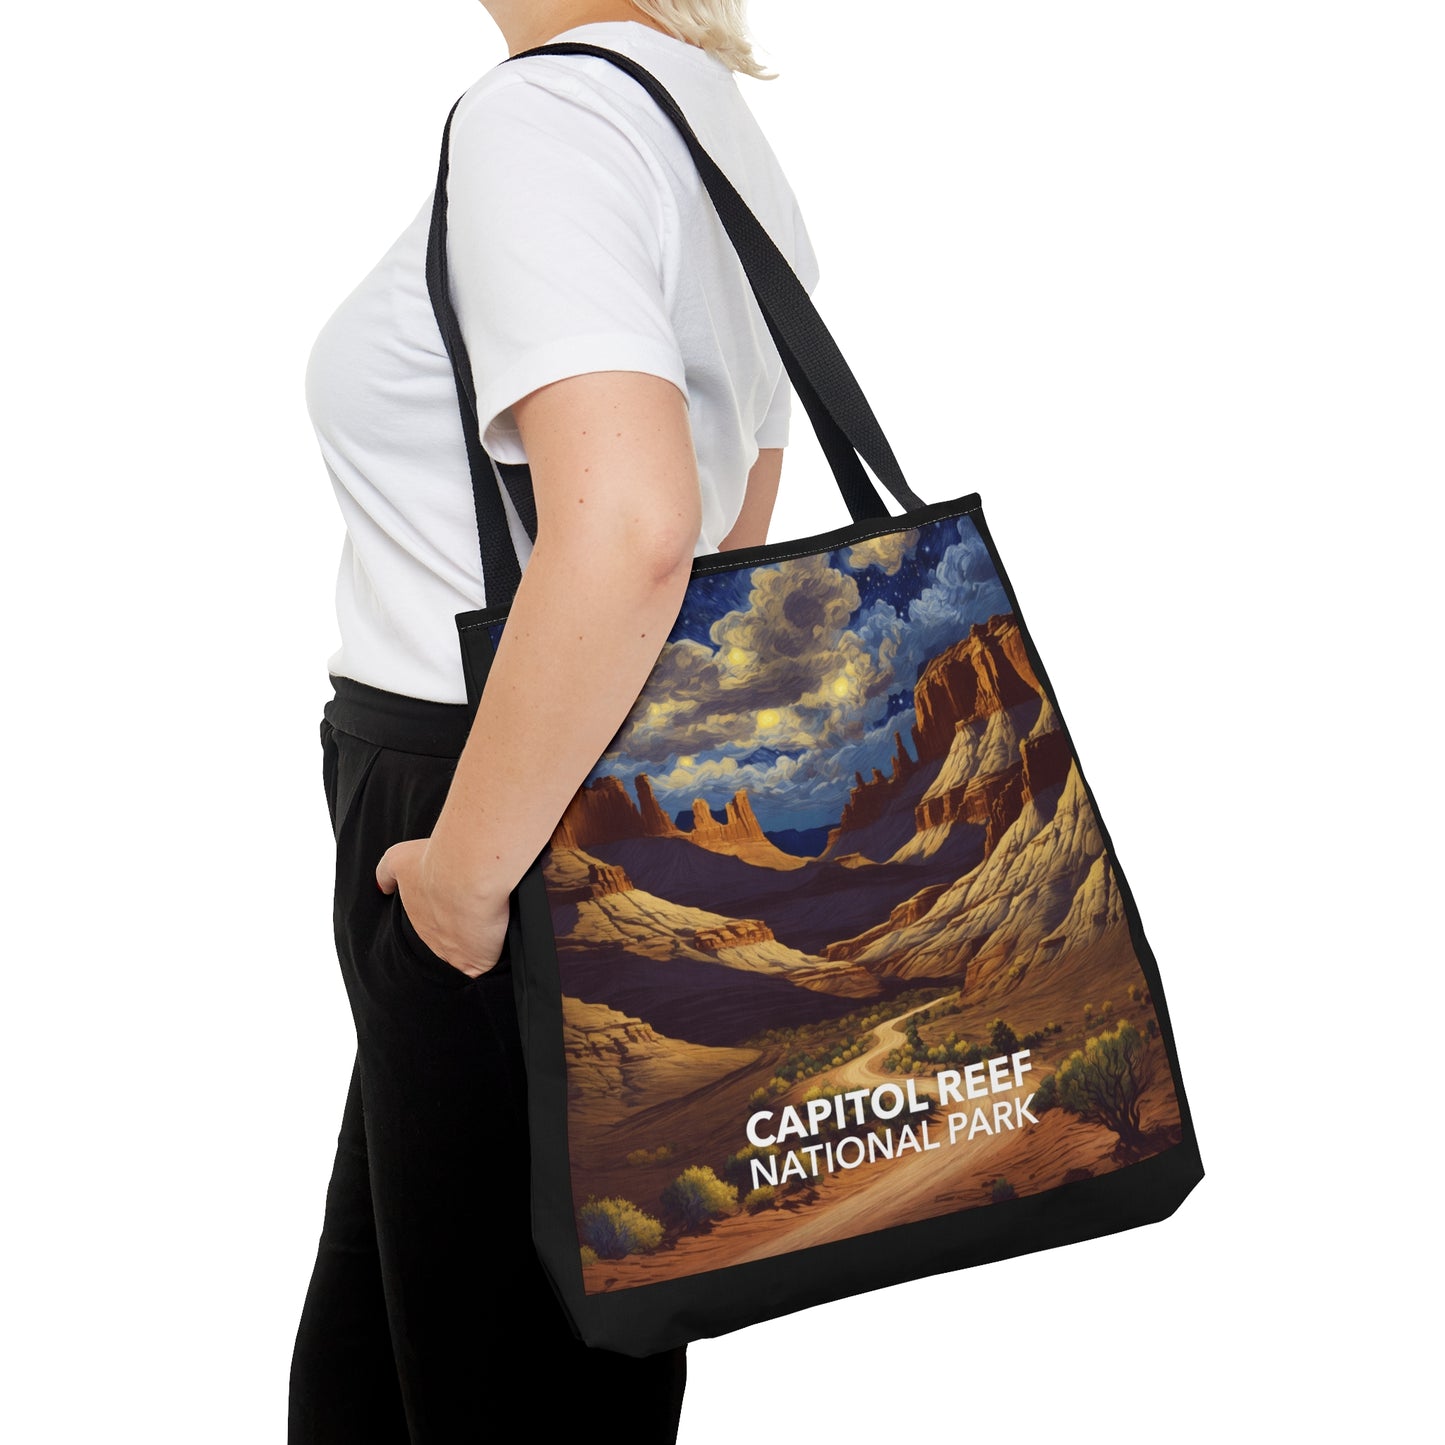 Capitol Reef National Park Tote Bag - The Starry Night